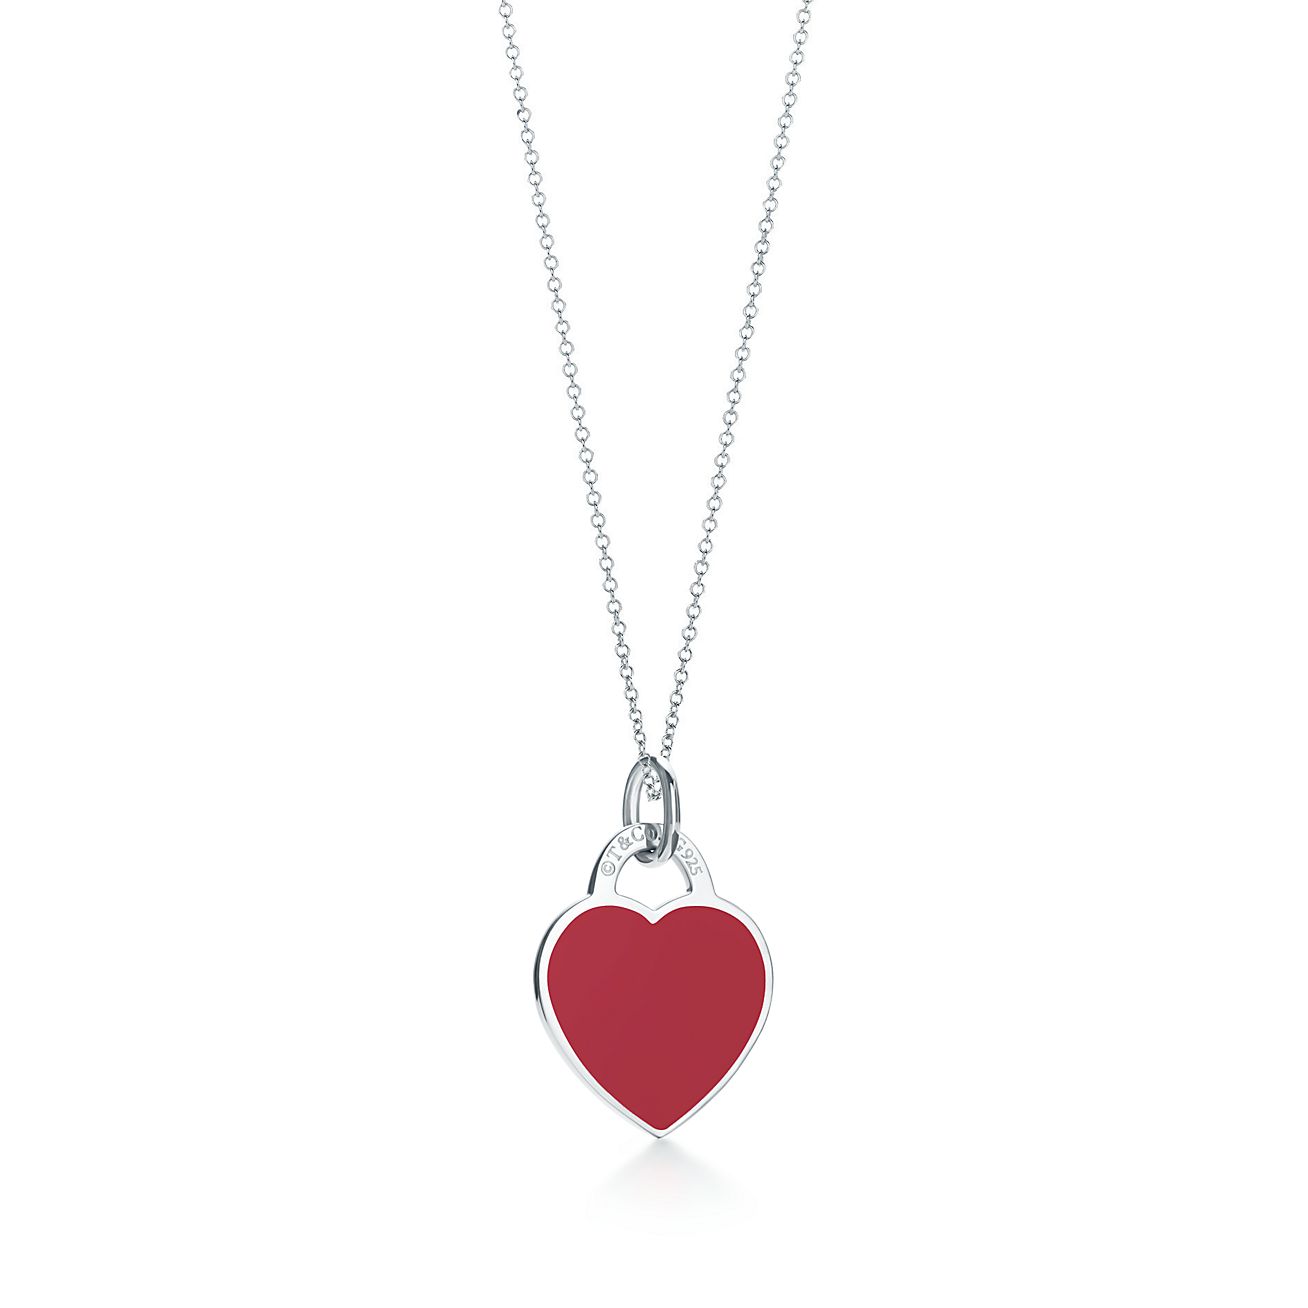 tiffany red heart necklace